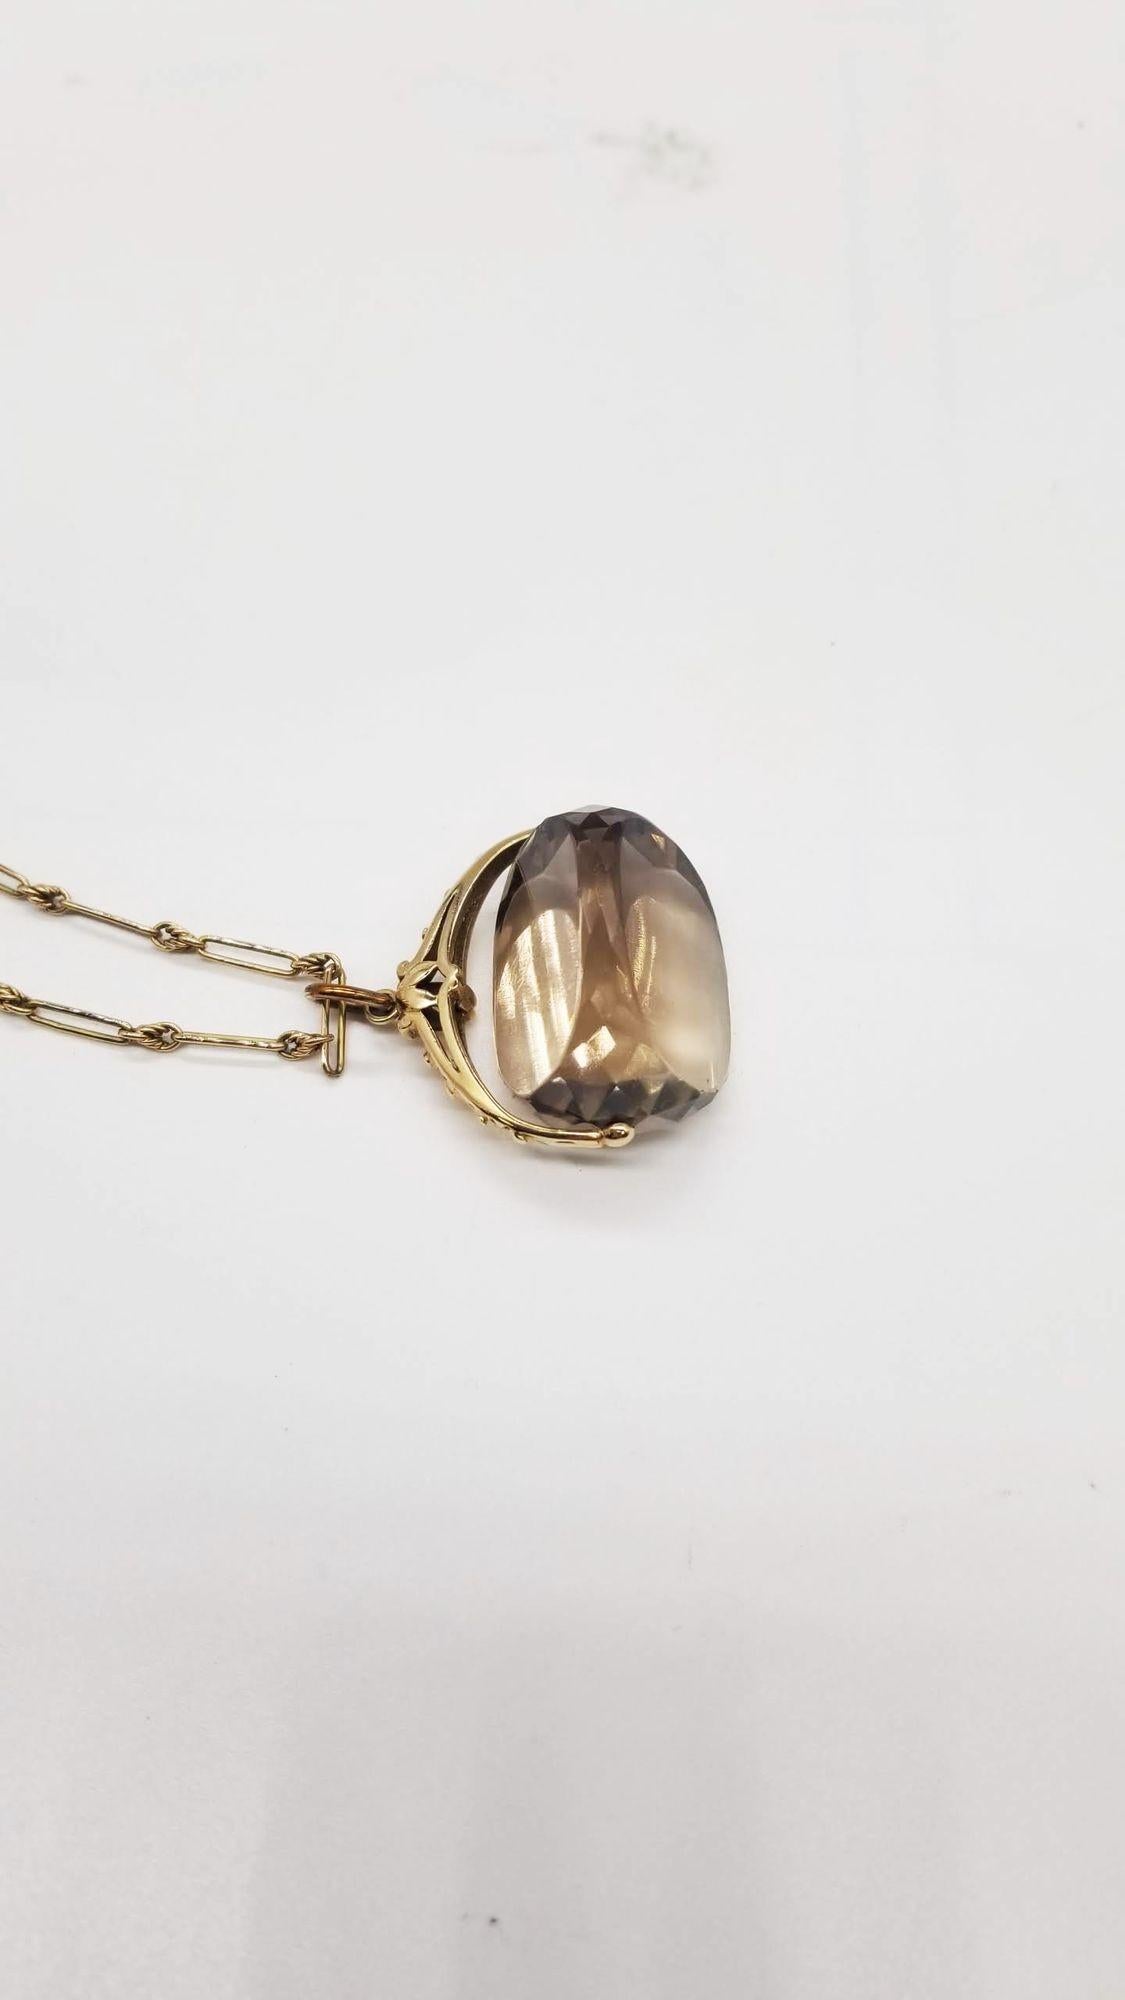 Vintage 14 Gold Necklace with Rose Gold Citrine Pendant In Excellent Condition For Sale In Van Nuys, CA